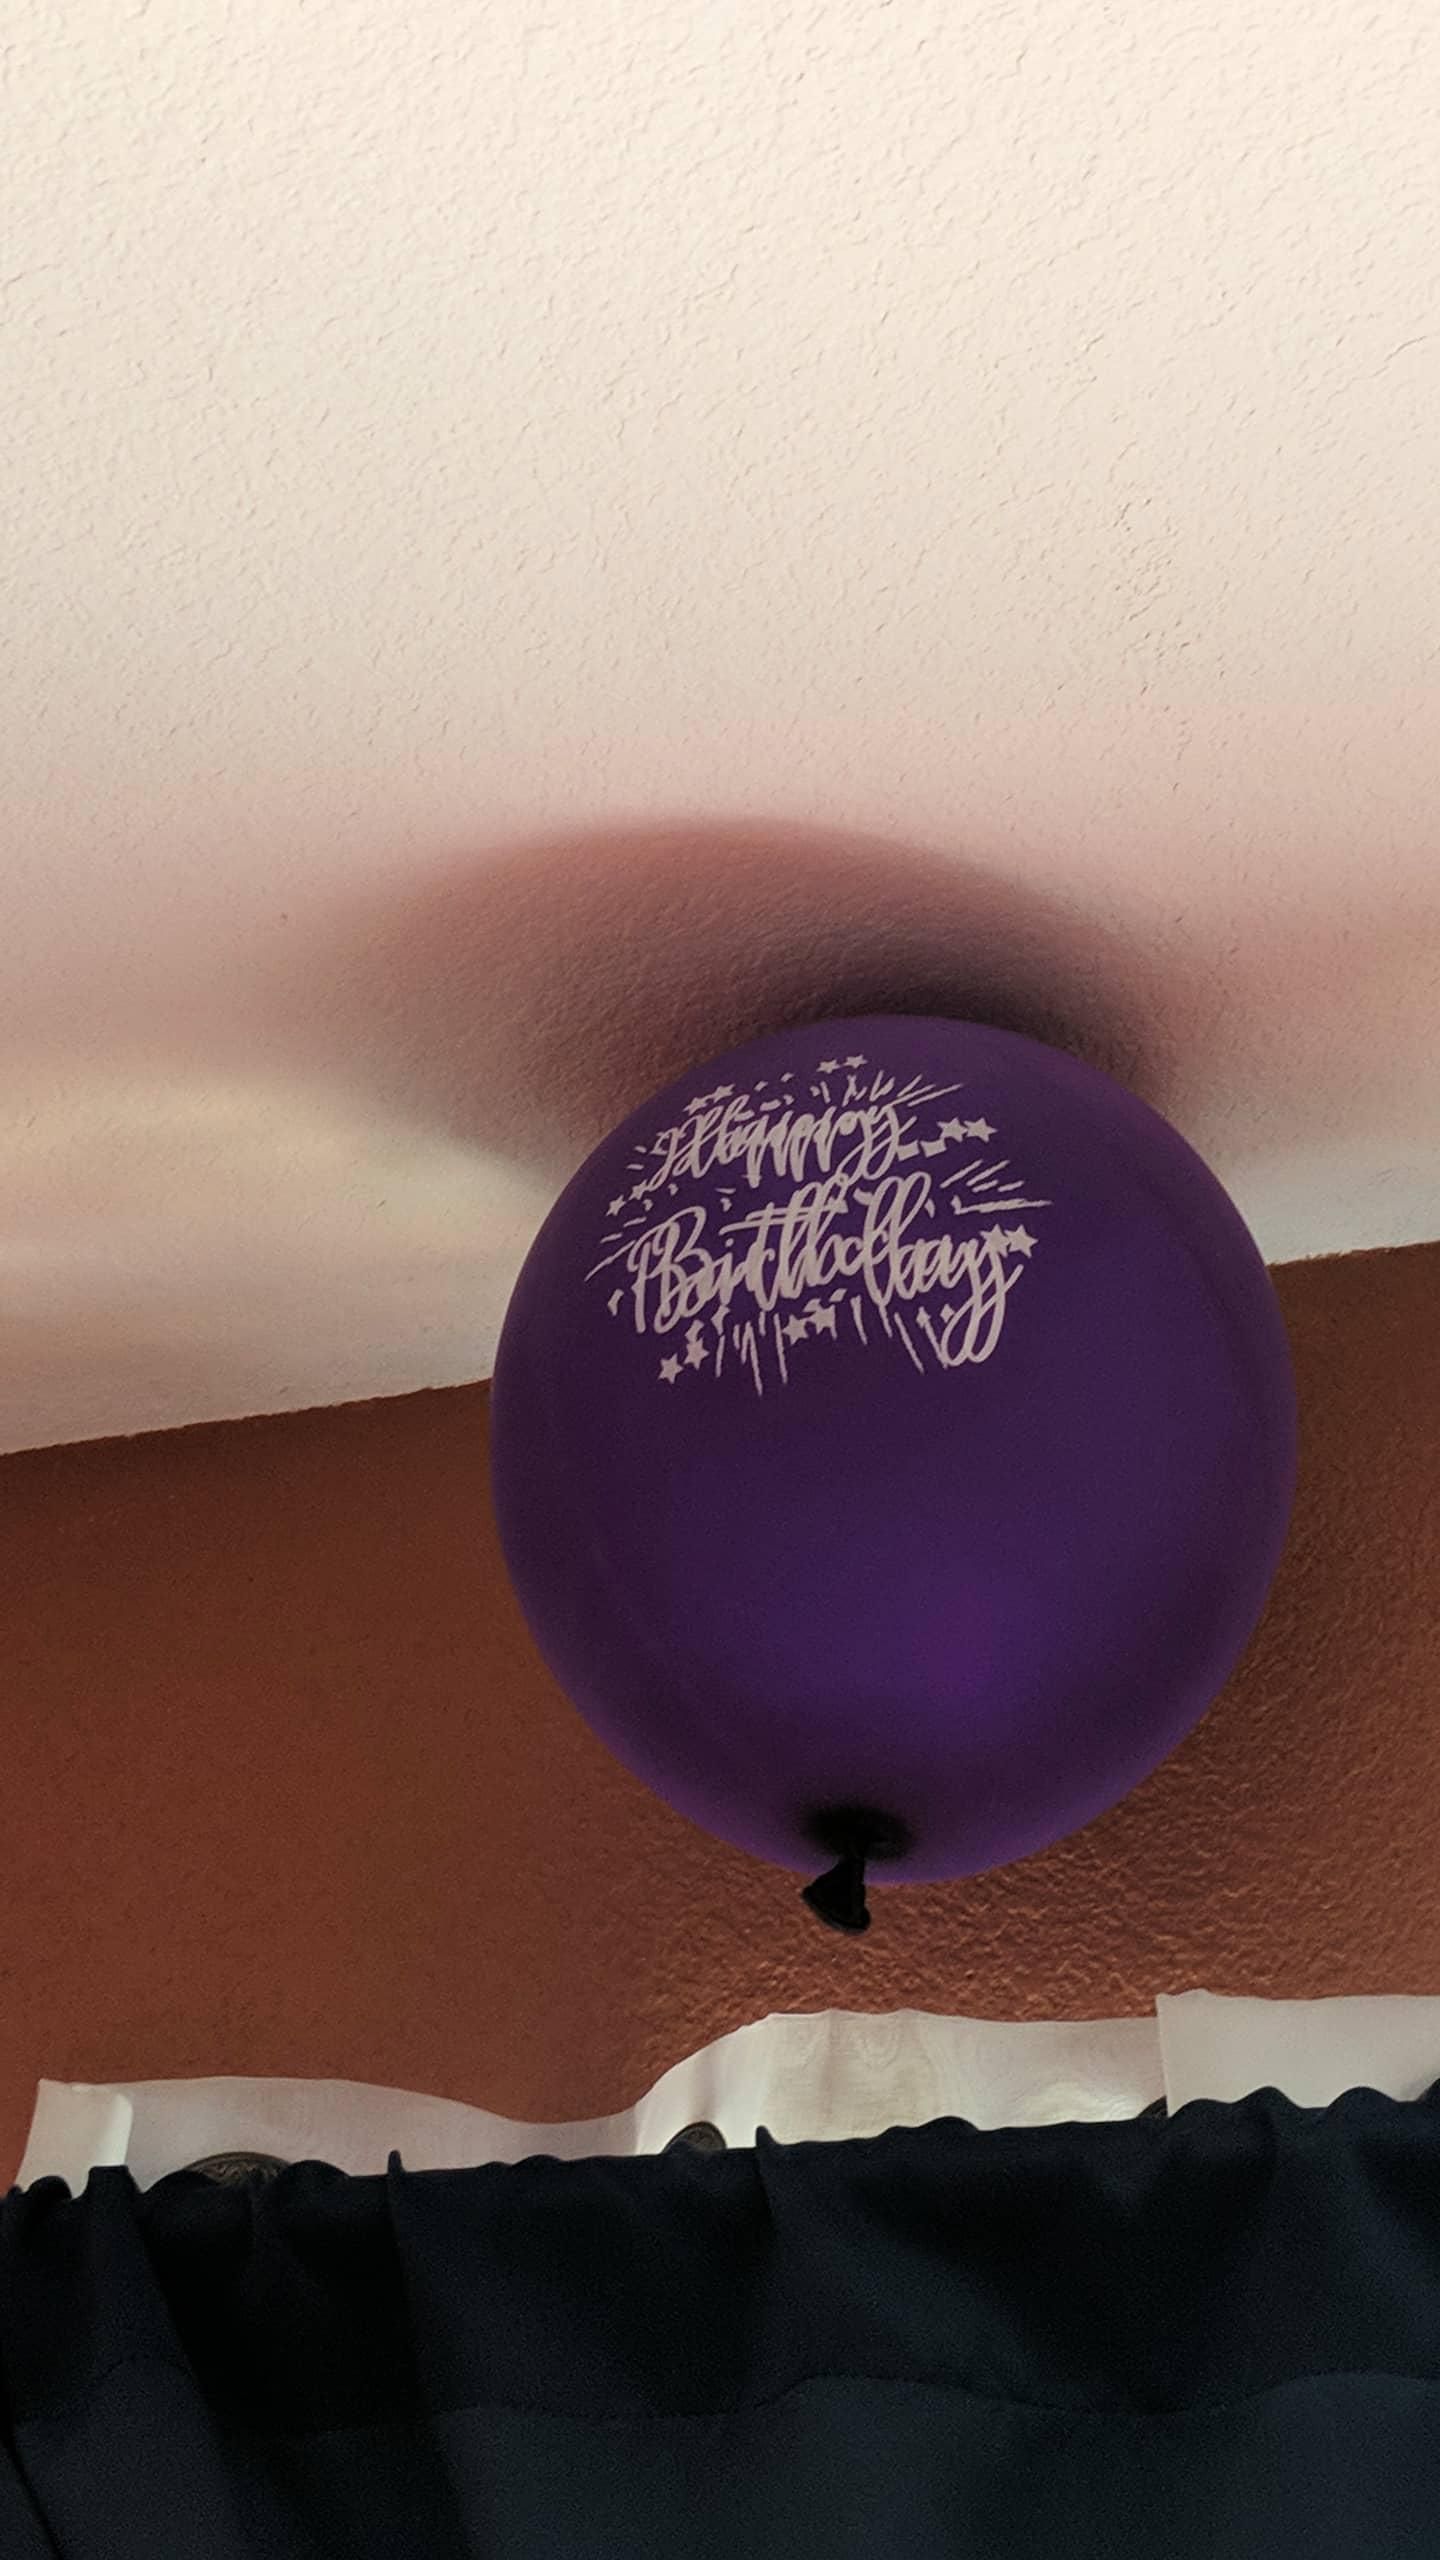 Got my vaccine today, saw this balloon and thought I was losing it for a sec